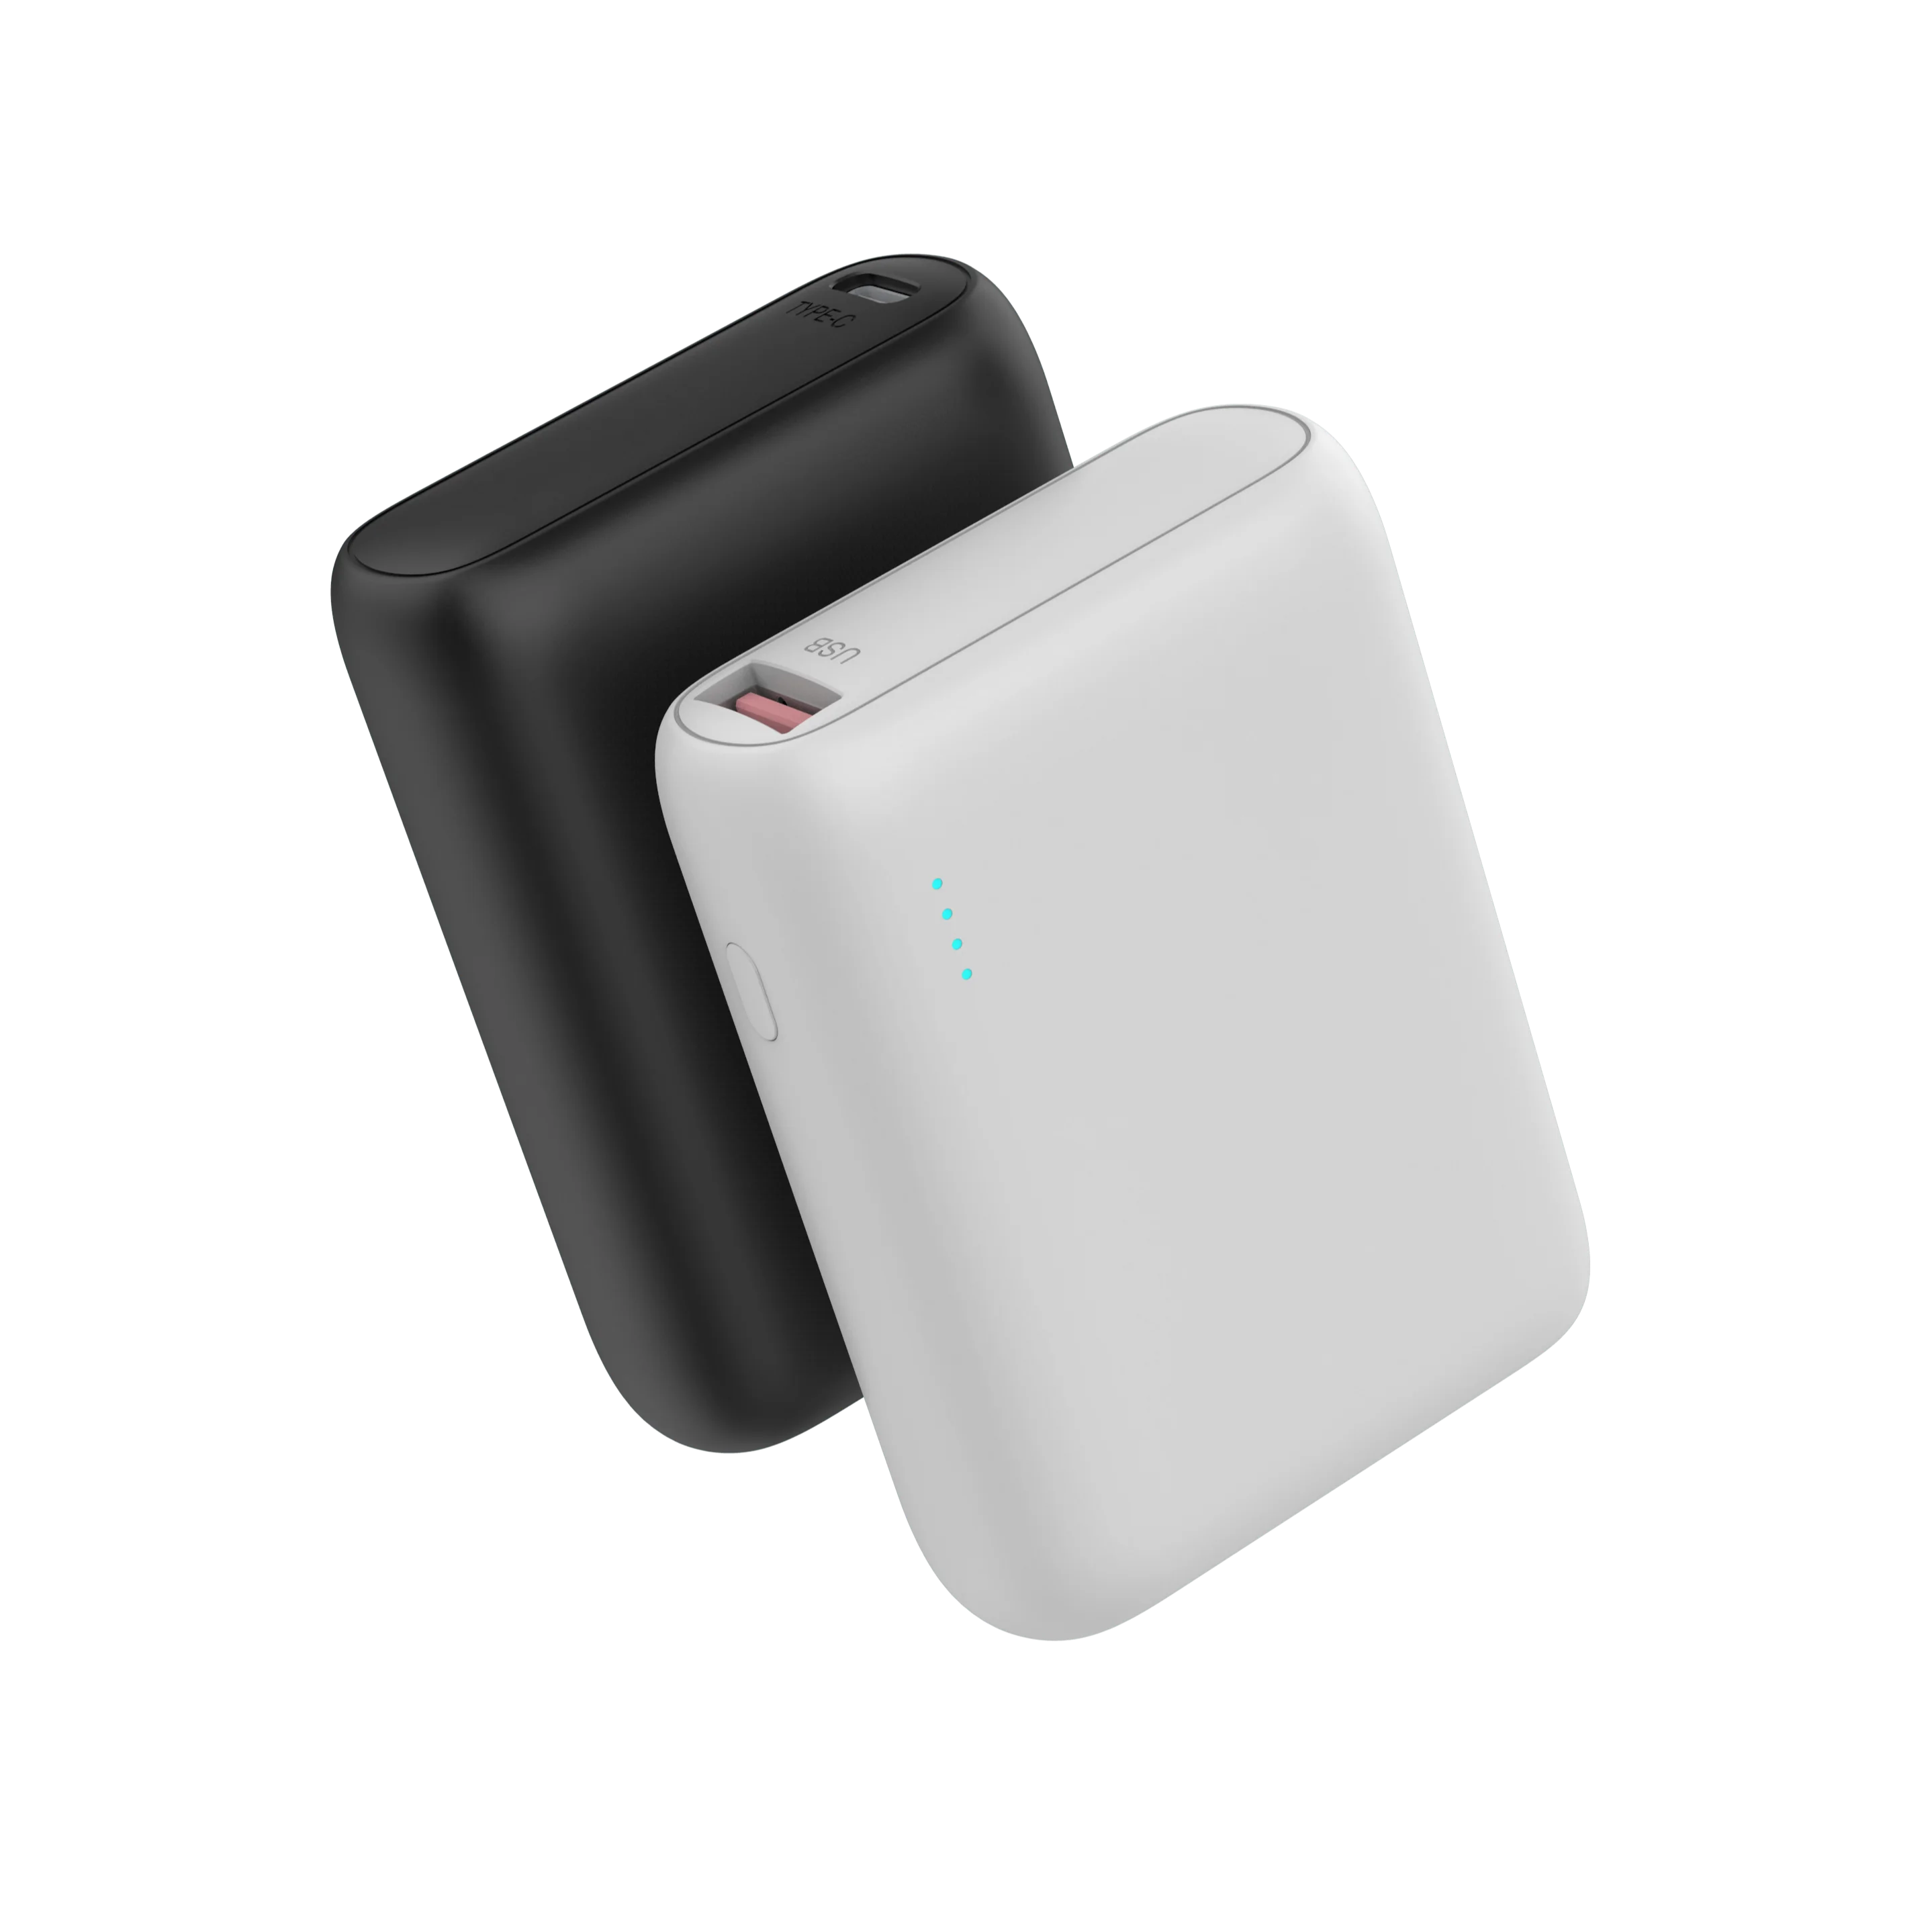 

Fast Portable Charger 10000mAh PD 18W Power Bank QC 3.0 for iPhone, iPad, Samsung Galaxy, Android and Other Smart Devices